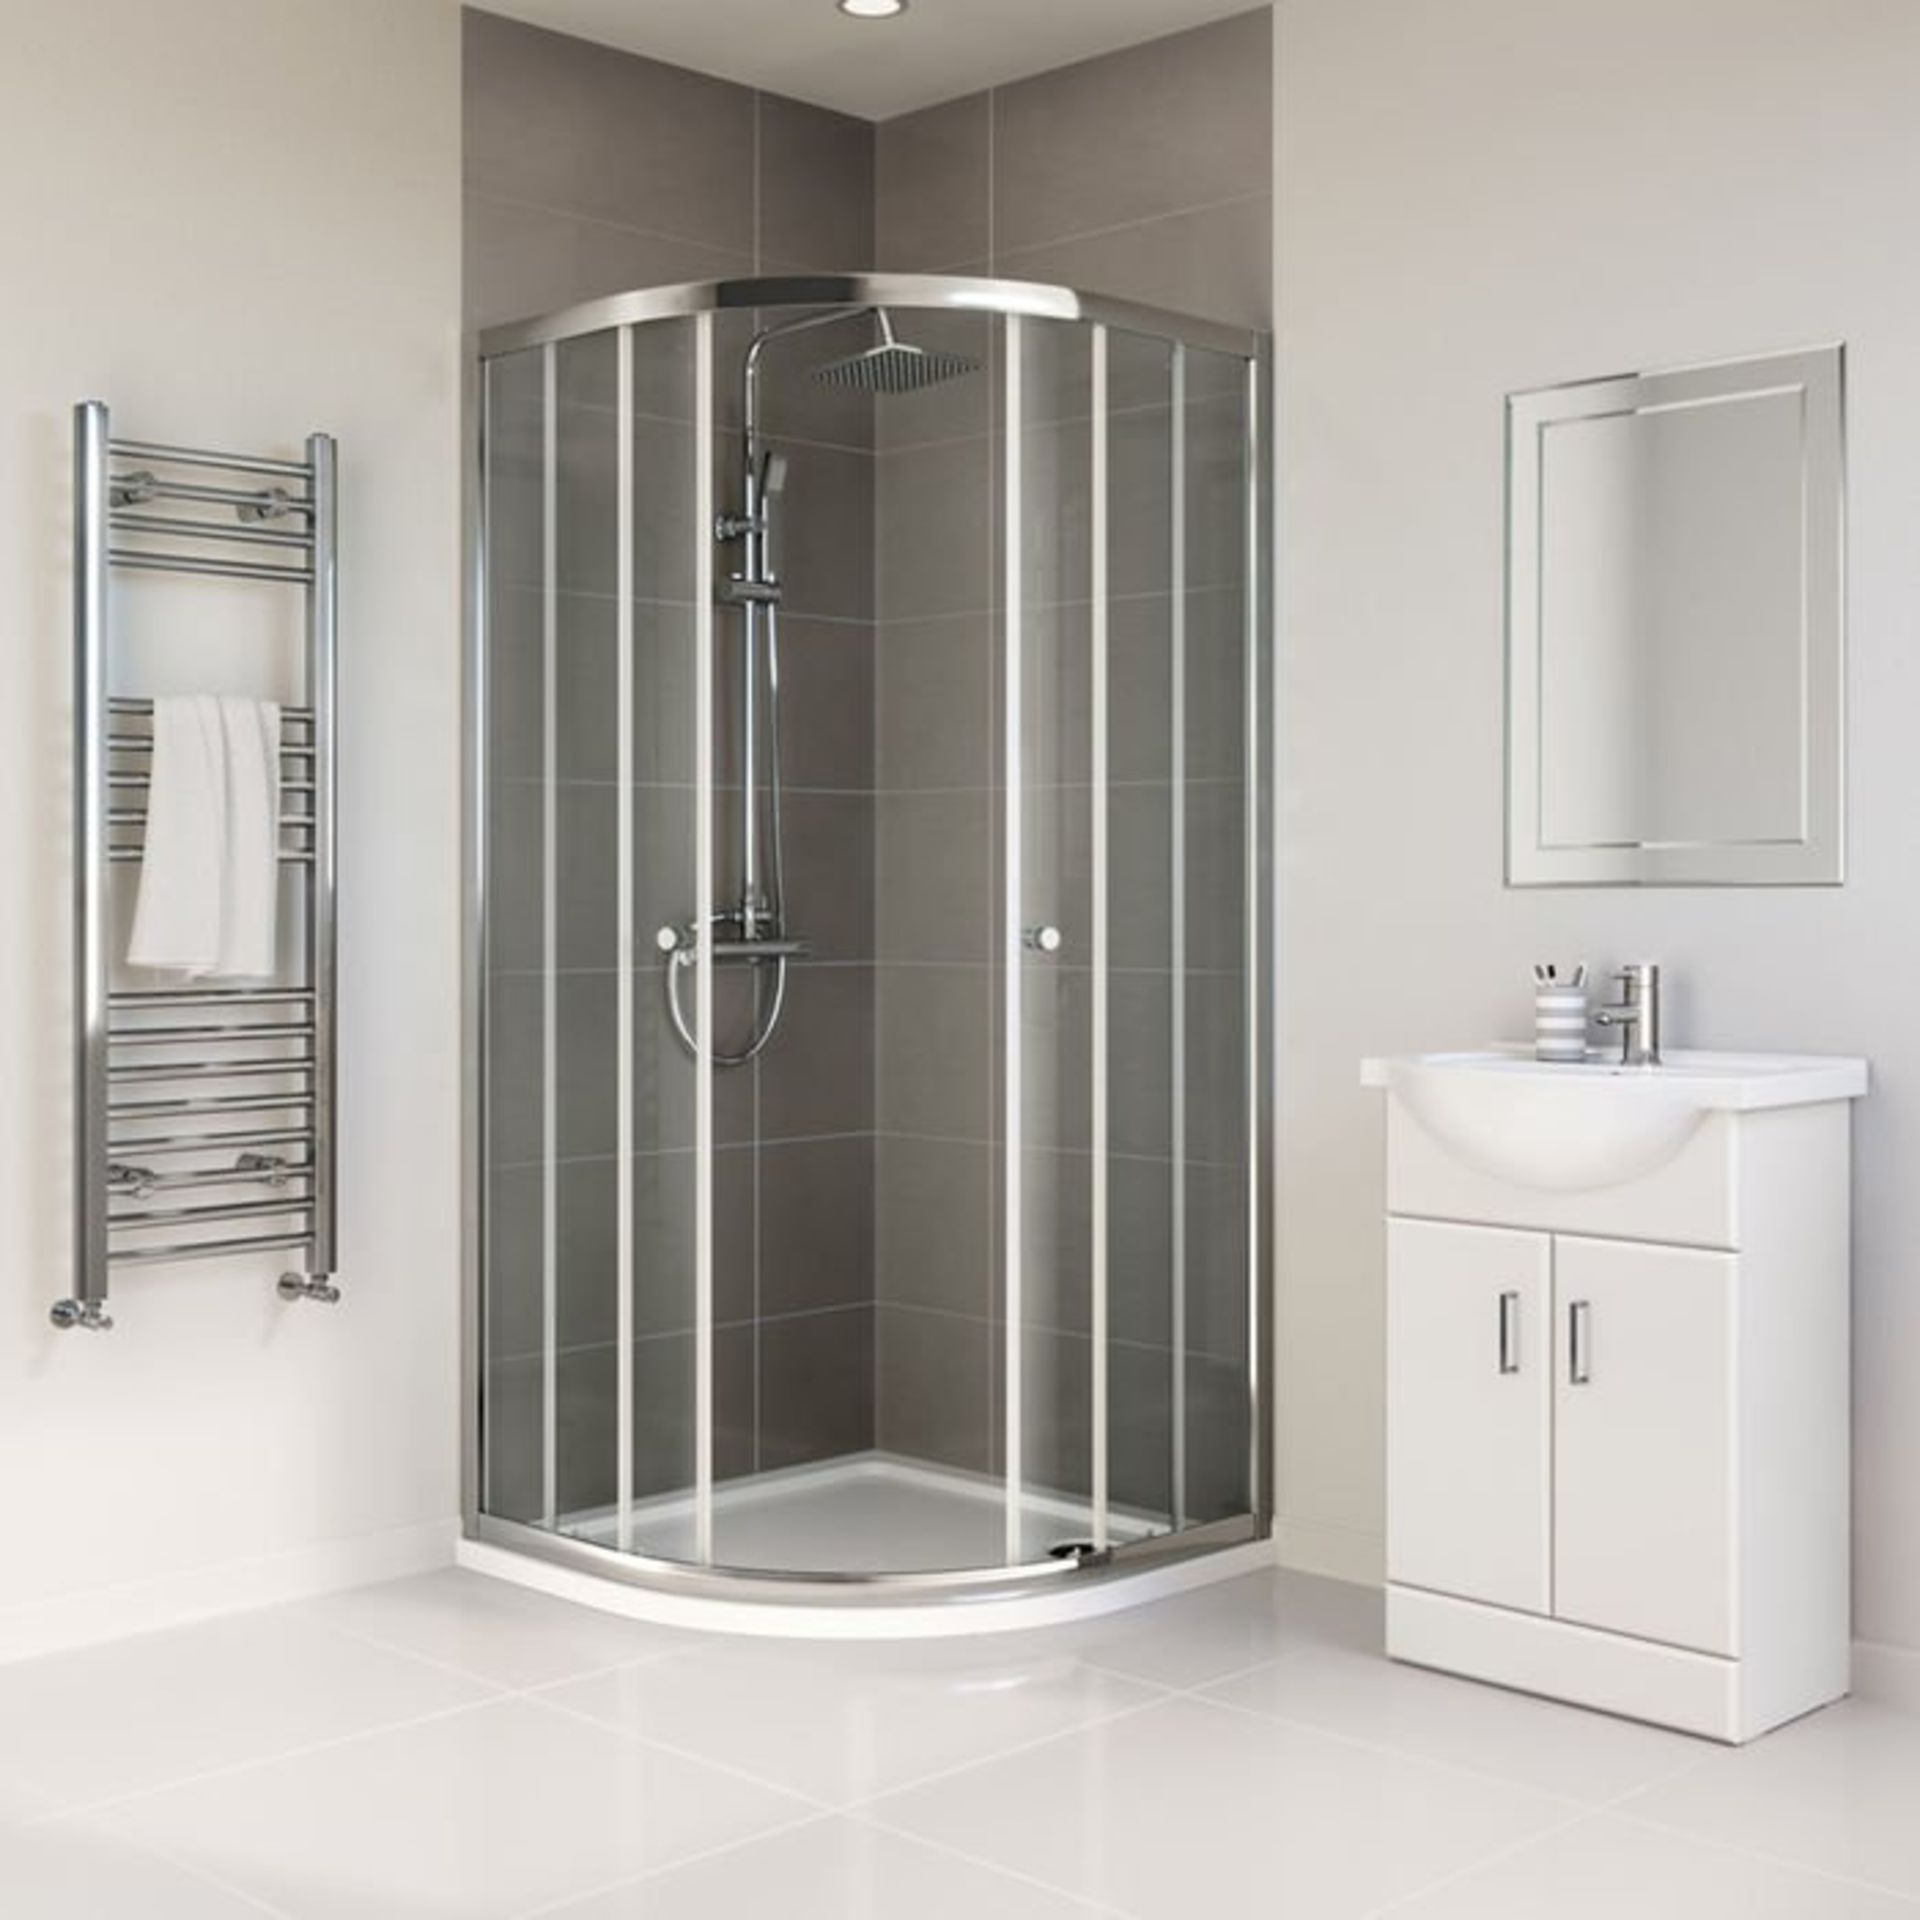 (G44) 800x800mm - Elements Quadrant Shower Enclosure RRP £199.99 4mm Safety Glass Fully waterproof - Image 4 of 6